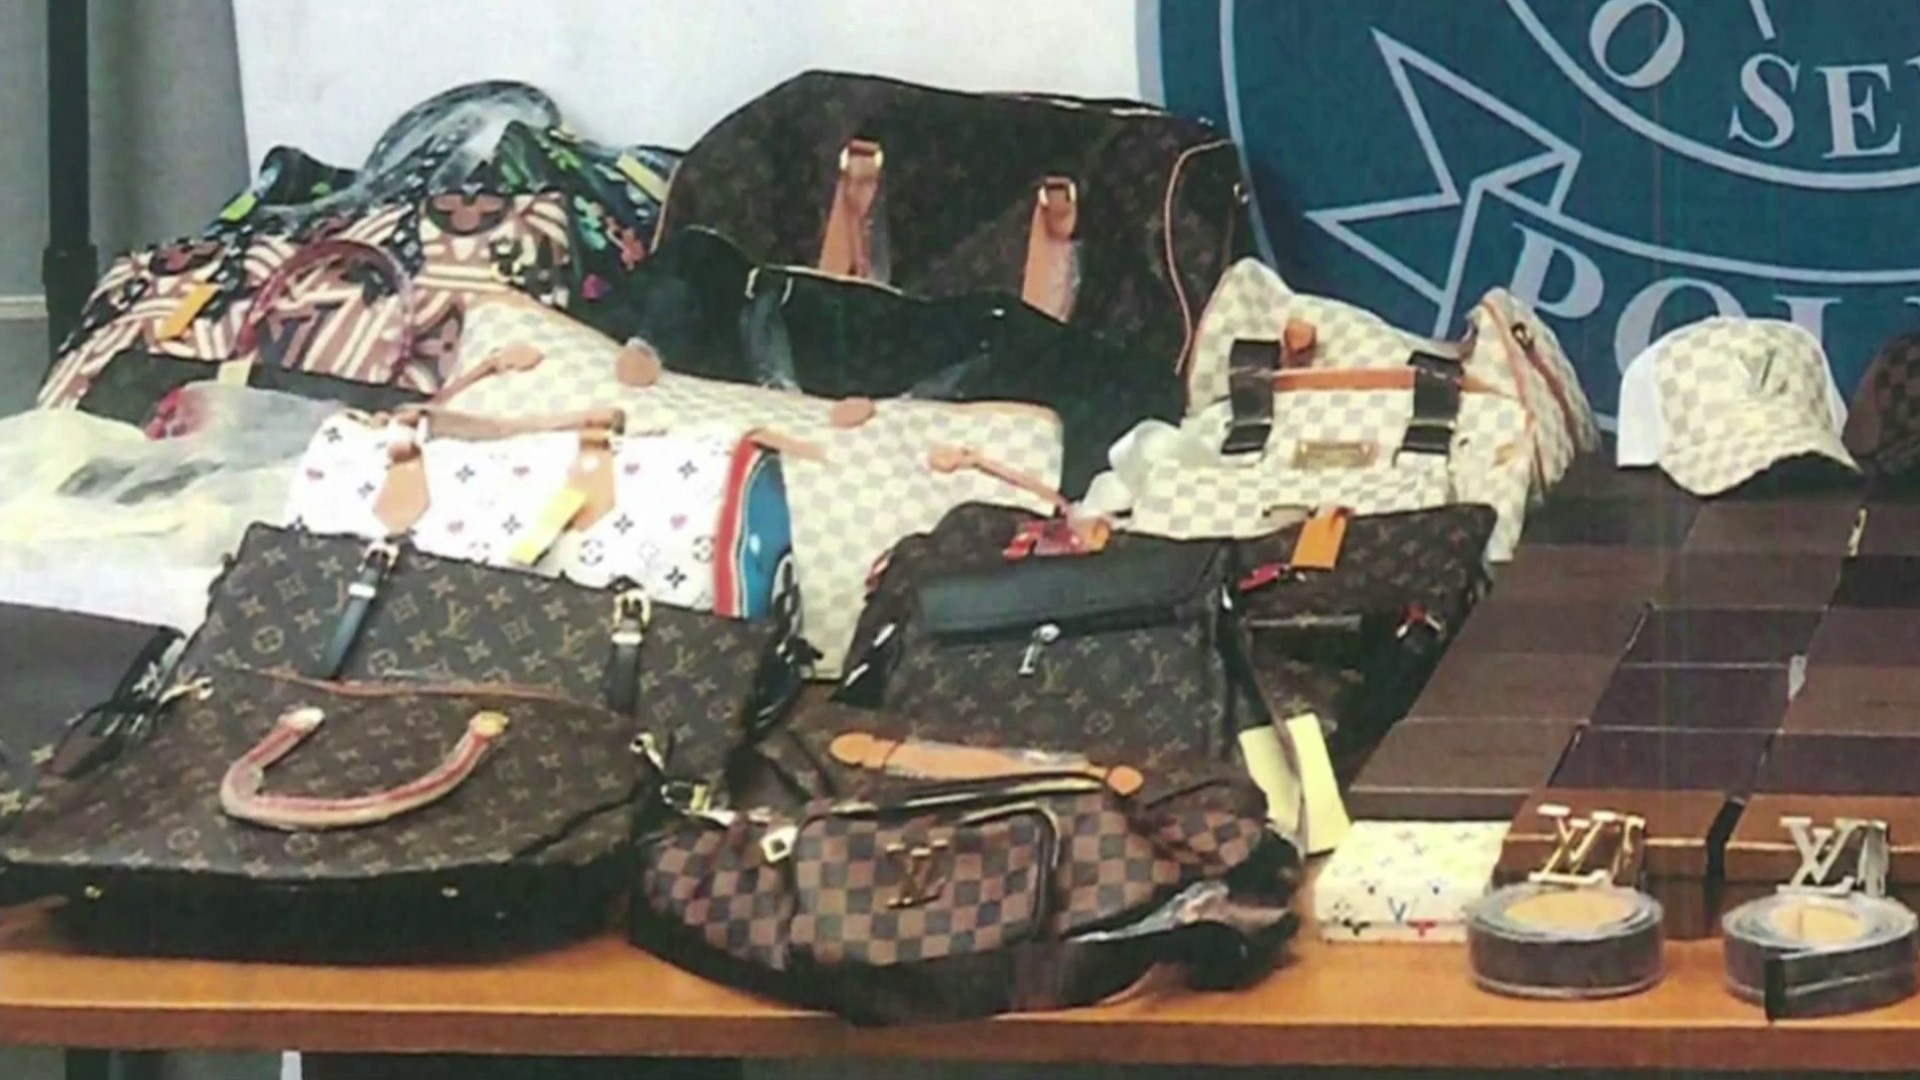 New York busts Chinatown ring selling fake bags